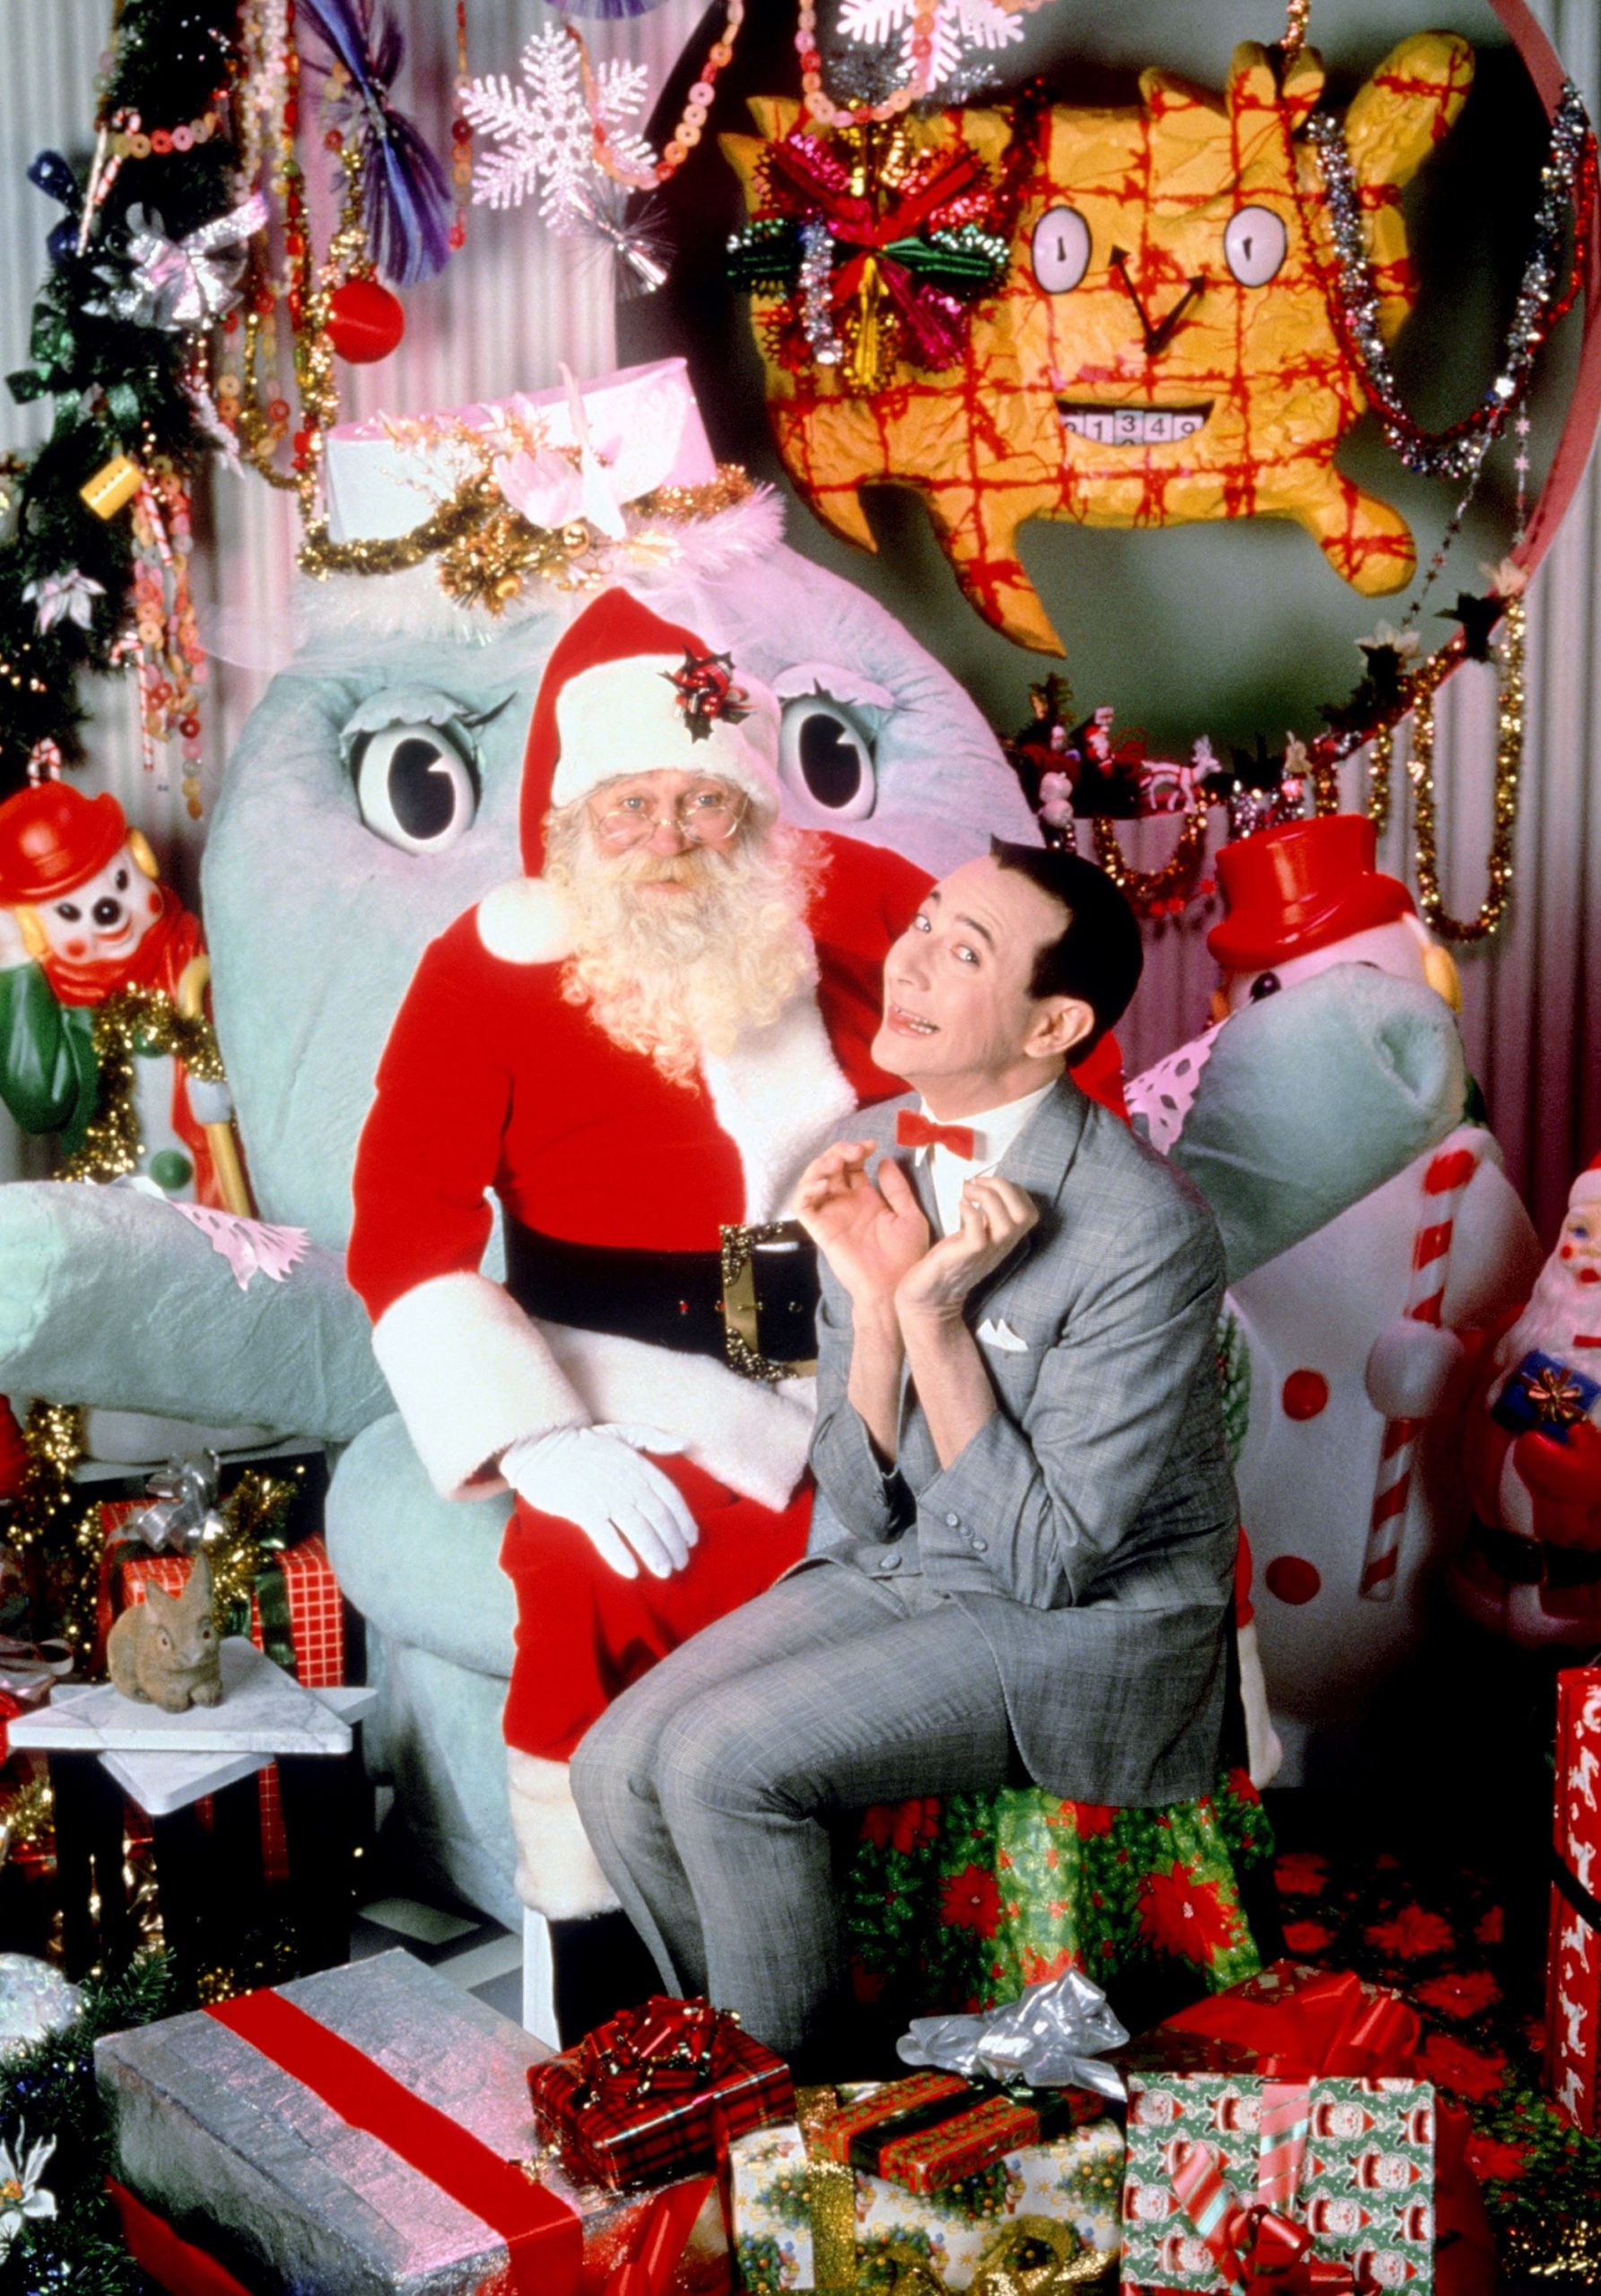 PEE-WEE'S PLAYHOUSE CHRISTMAS SPECIAL